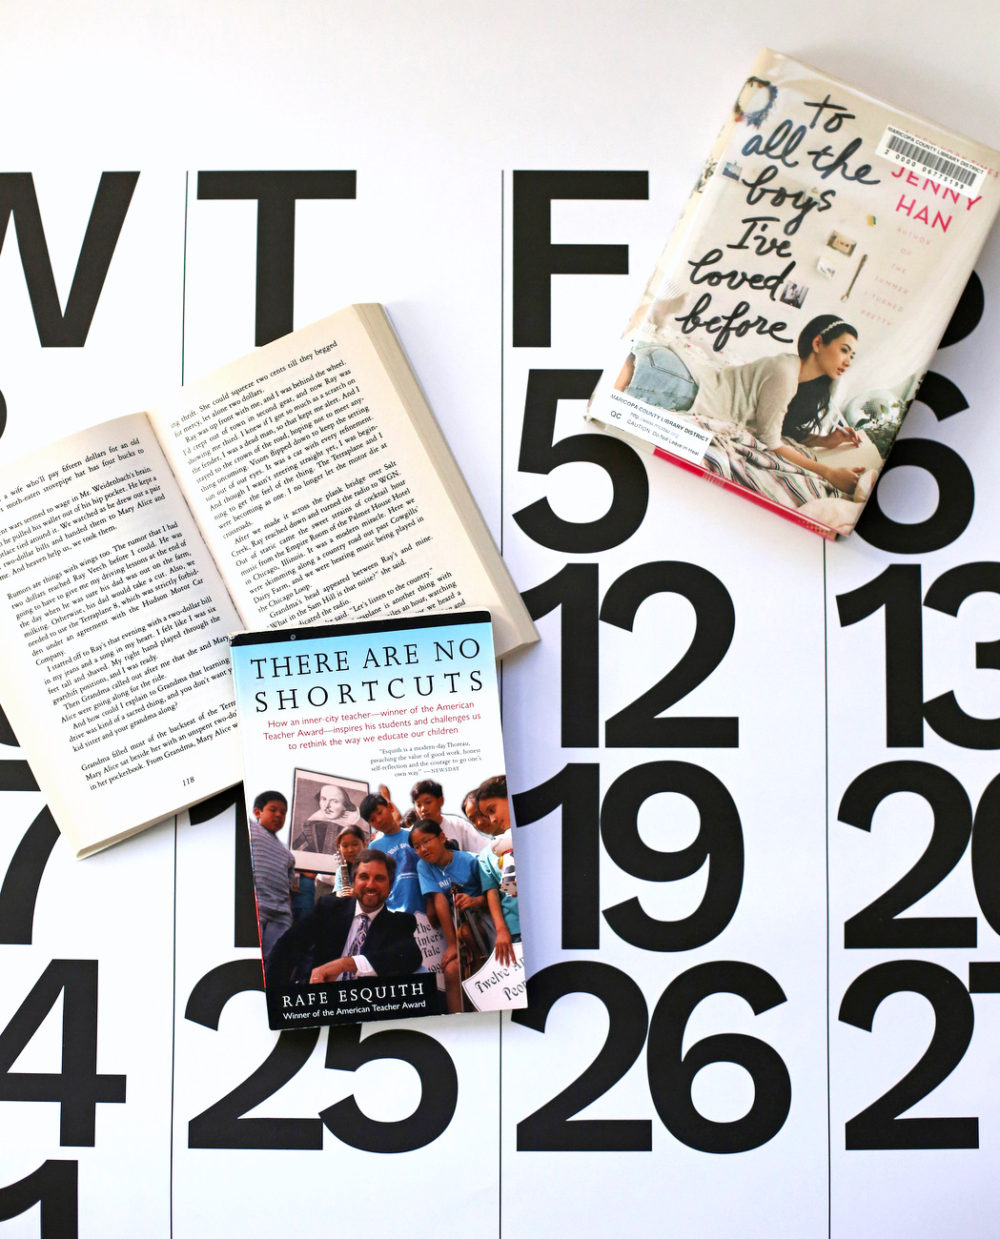 Twelve books to read in 2018, one for each month picked to correspond with the season - the perfect way to organize a year of reading!